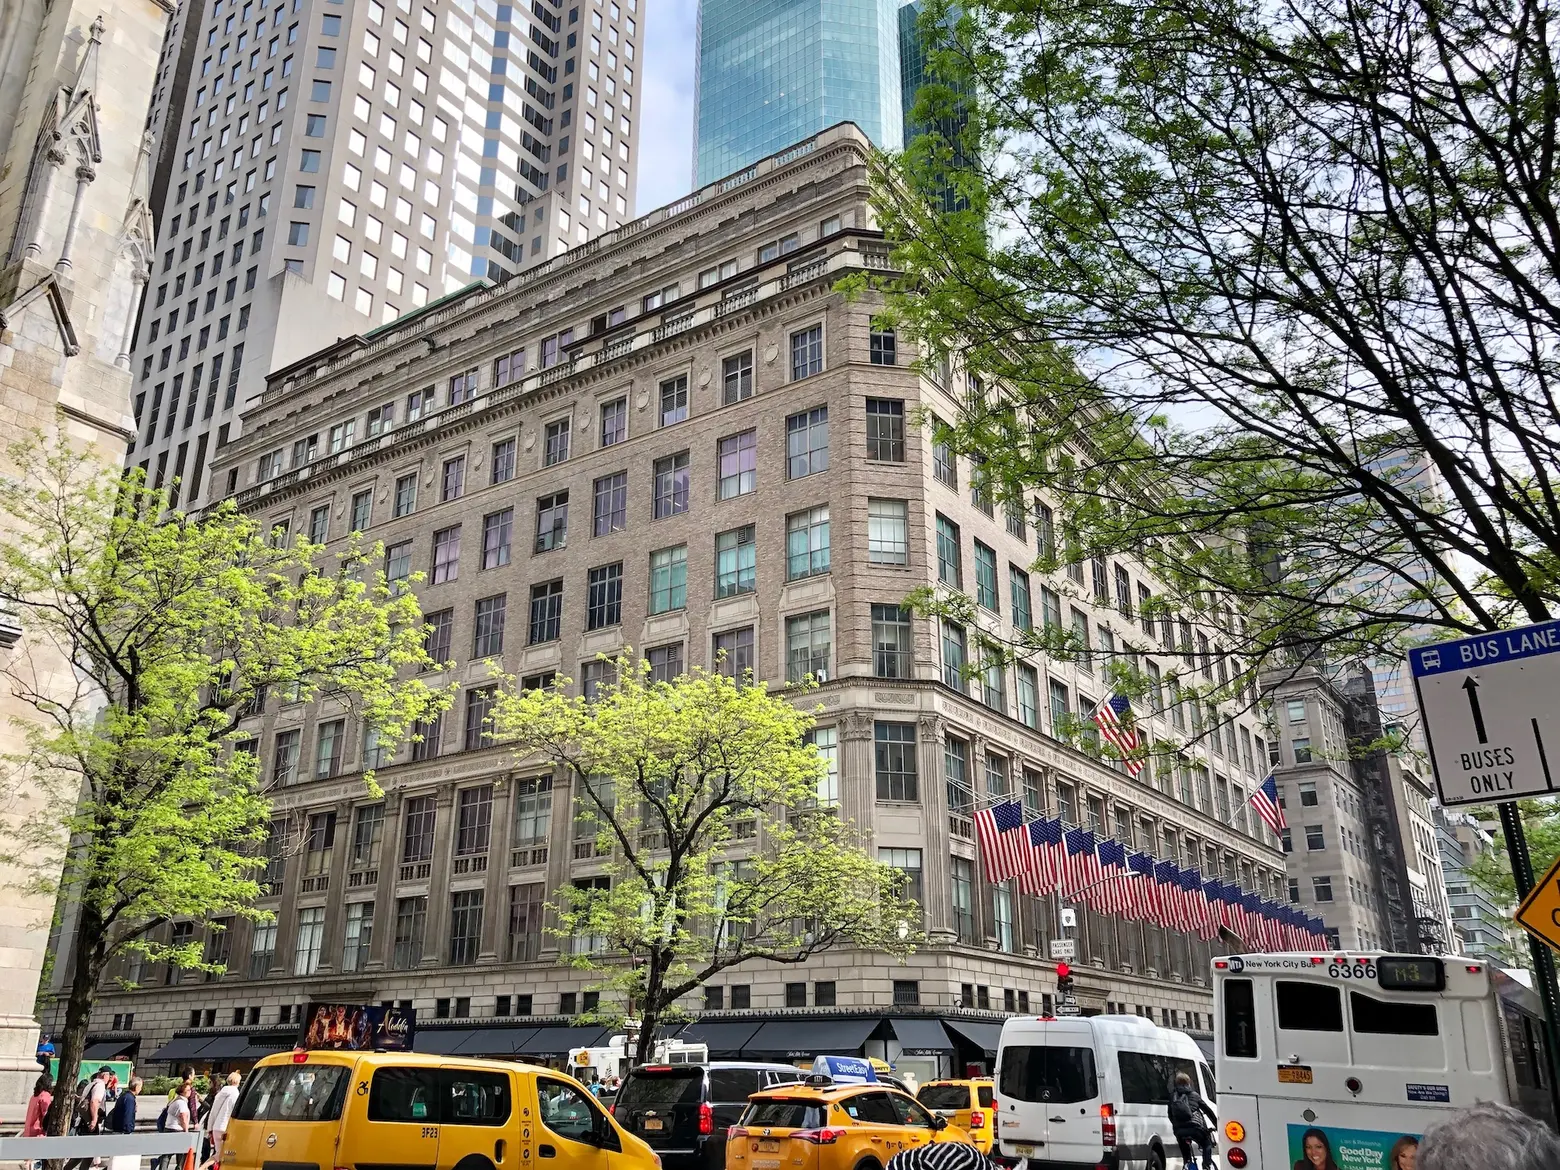 Saks 5th Avenue : All Information about Shops and Sales 2023